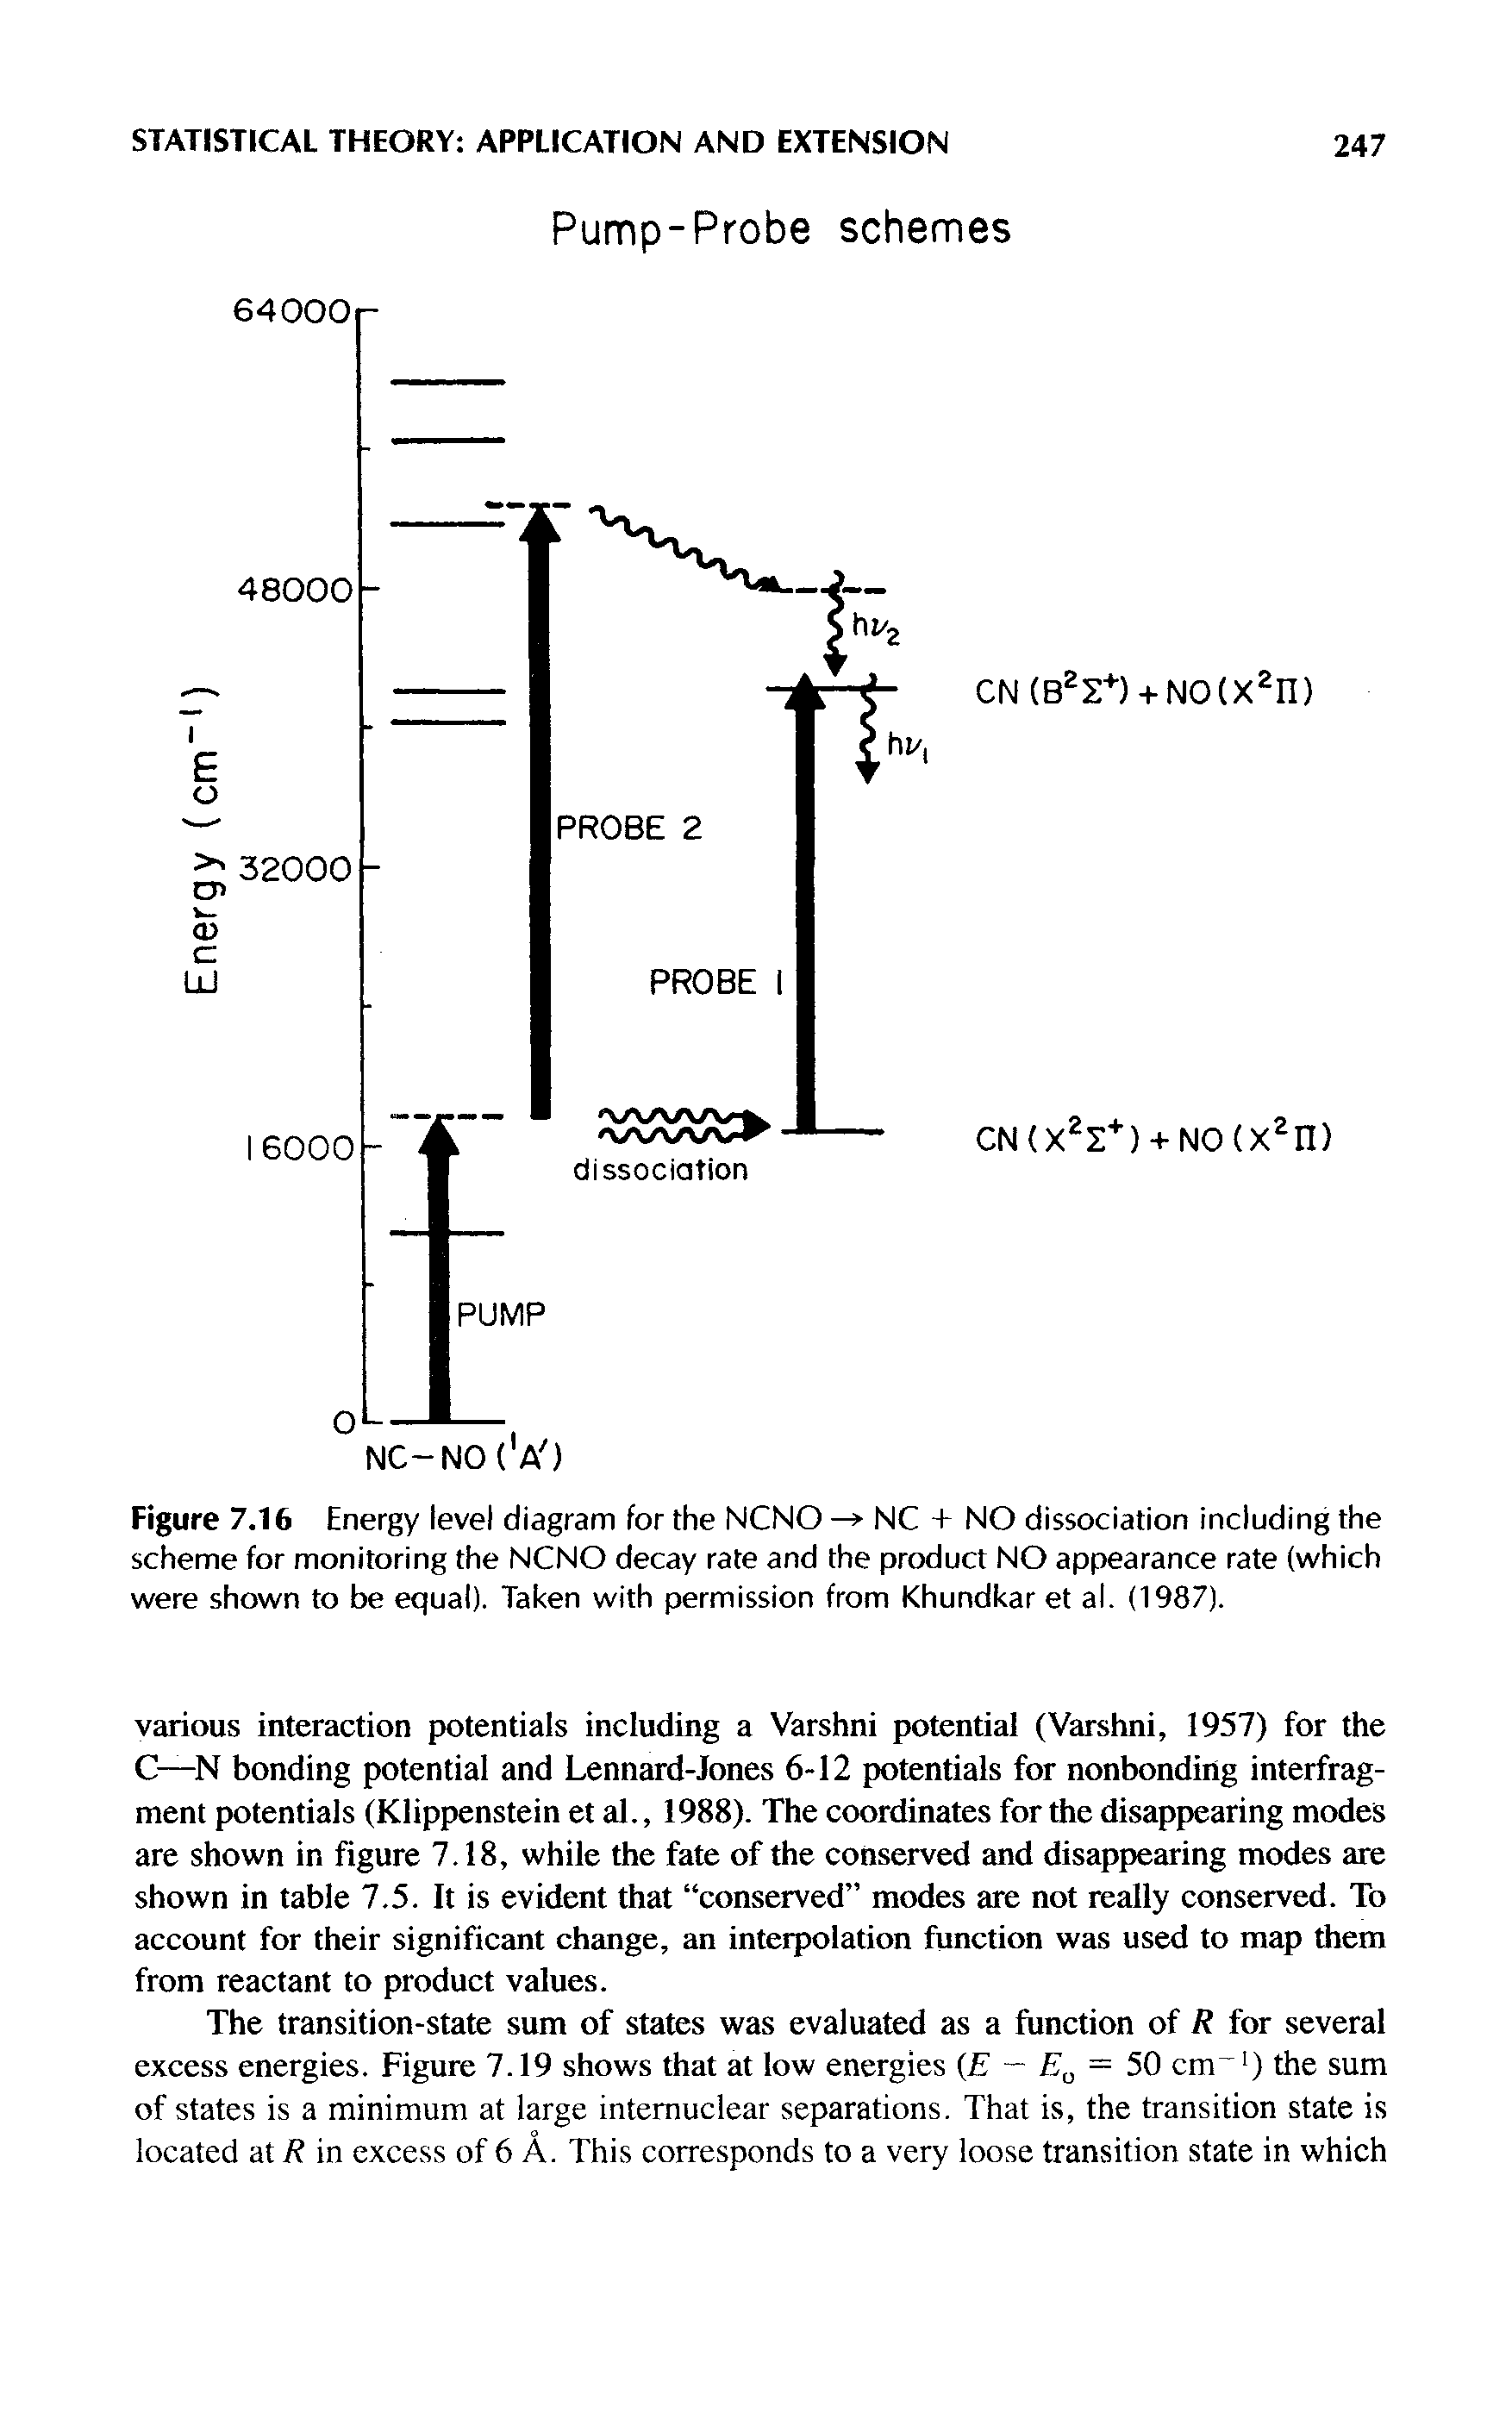 Figure 7.16 Energy level diagram for the NCNO NC + NO dissociation including the scheme for monitoring the NCNO decay rate and the product NO appearance rate (which were shown to be equal). Taken with permission from Khundkar et al. (1987).